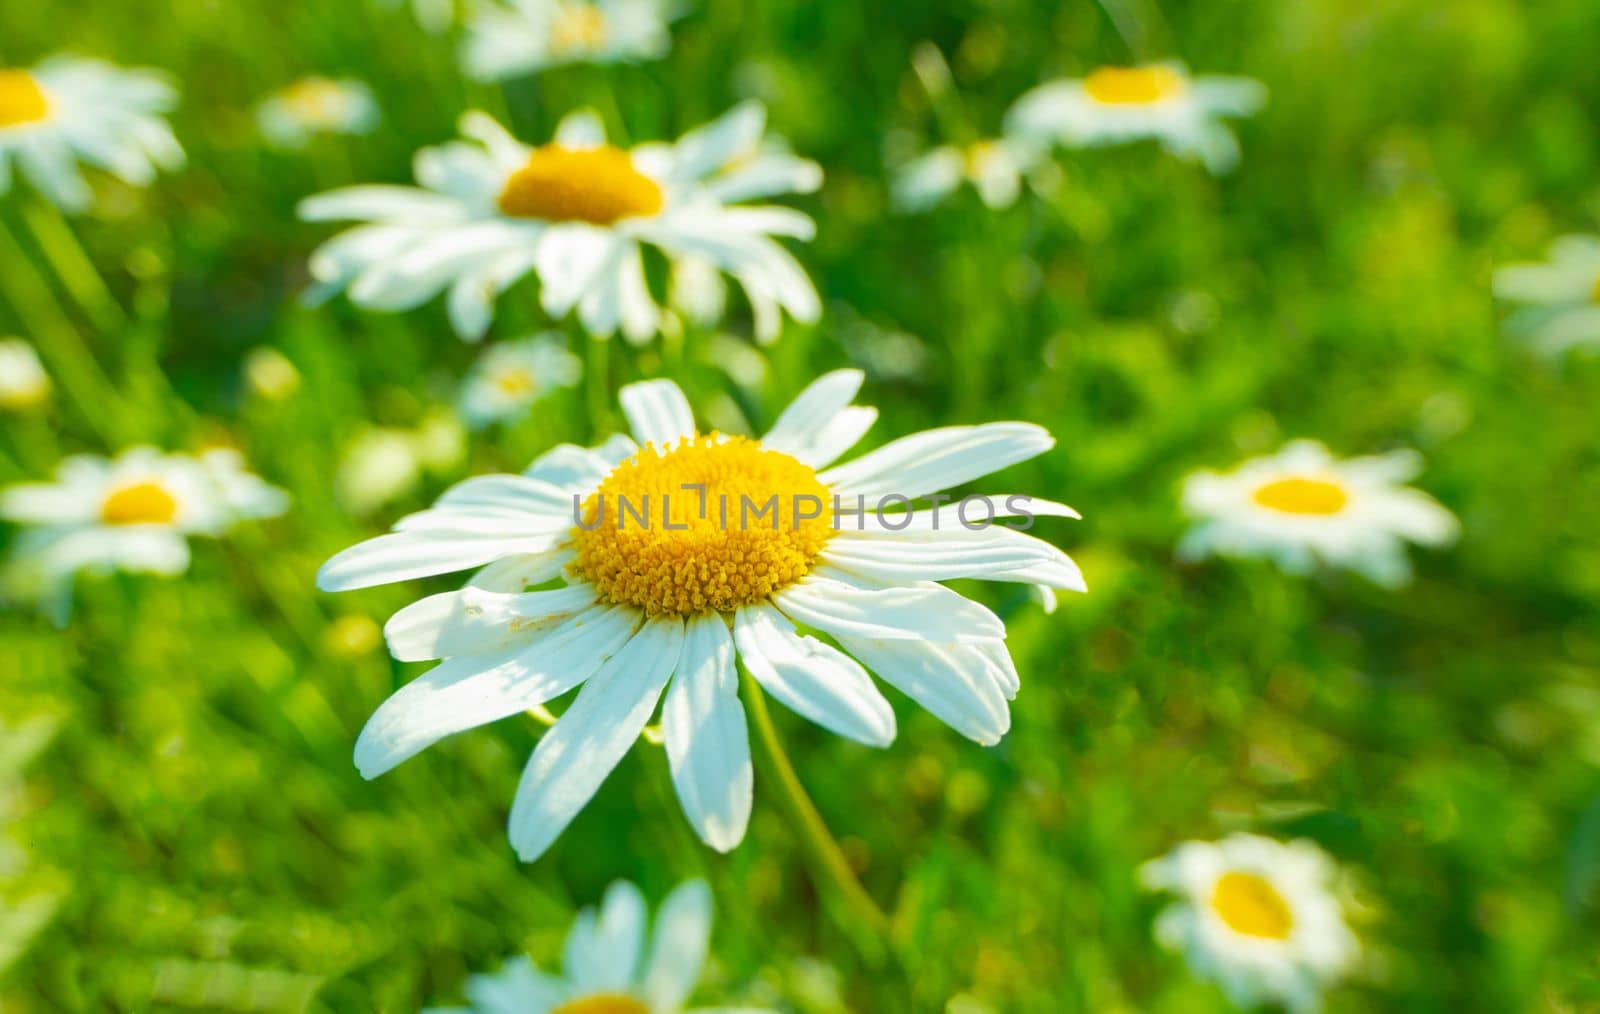 Blooming daisies in the sun on a blurry background of grass by kajasja